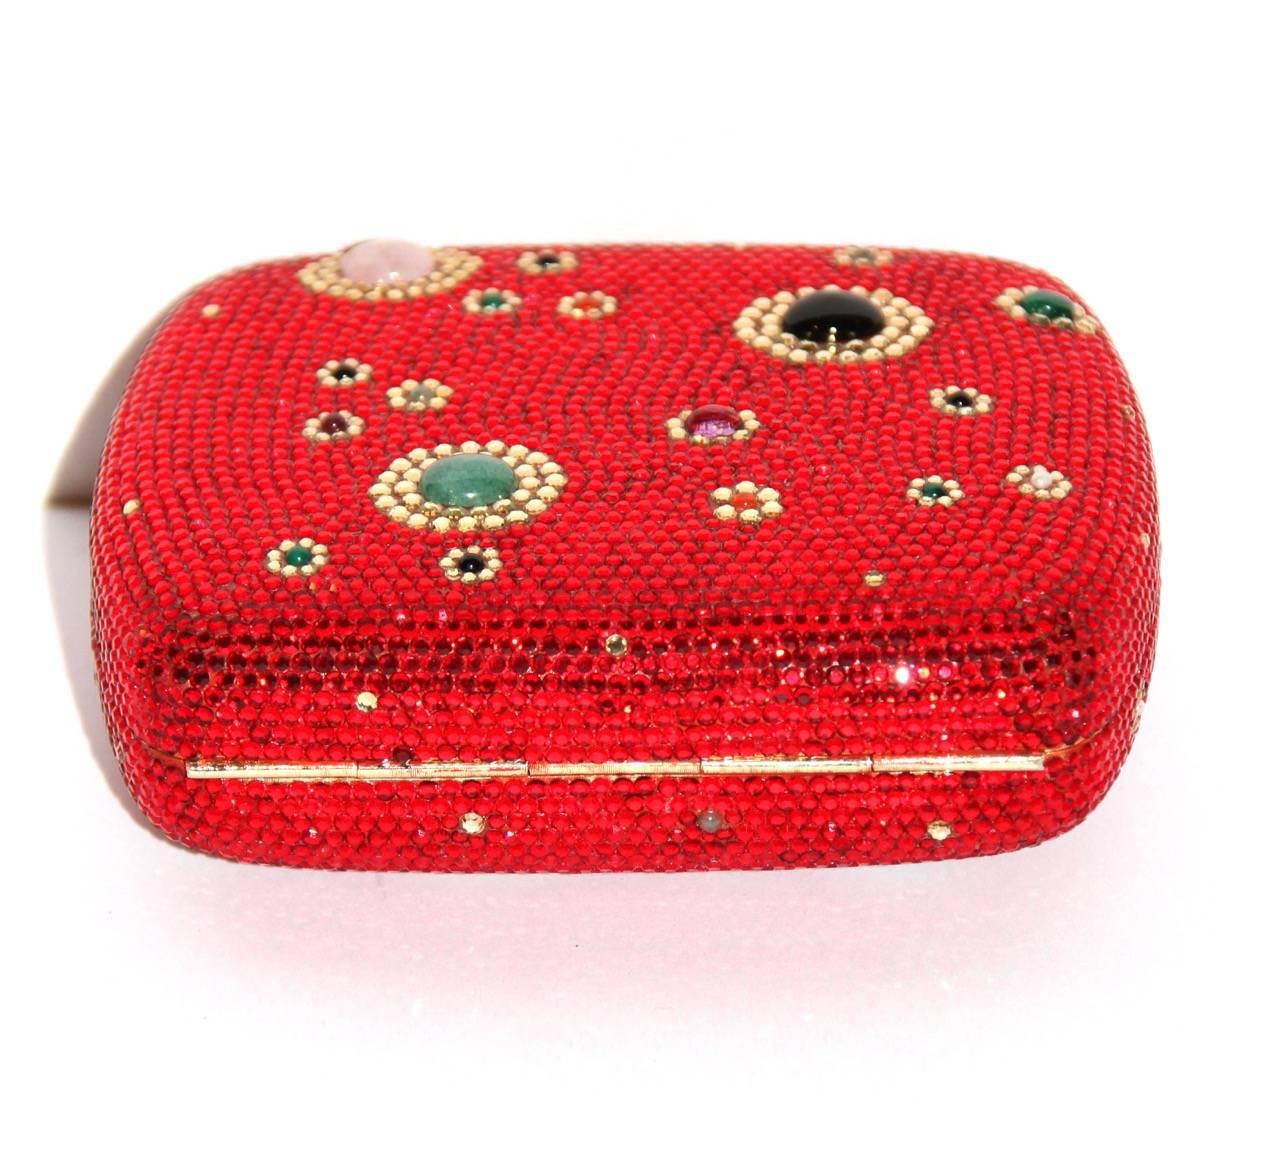 Amazing multicolored Judith Leiber Swarovski crystal minaudiere in excellent condition with floral pattern and gold-tone trame.
Top push button closure, gold leather lining, two compartments, gold-tone chain shoulder strap. Two missing crystals (not